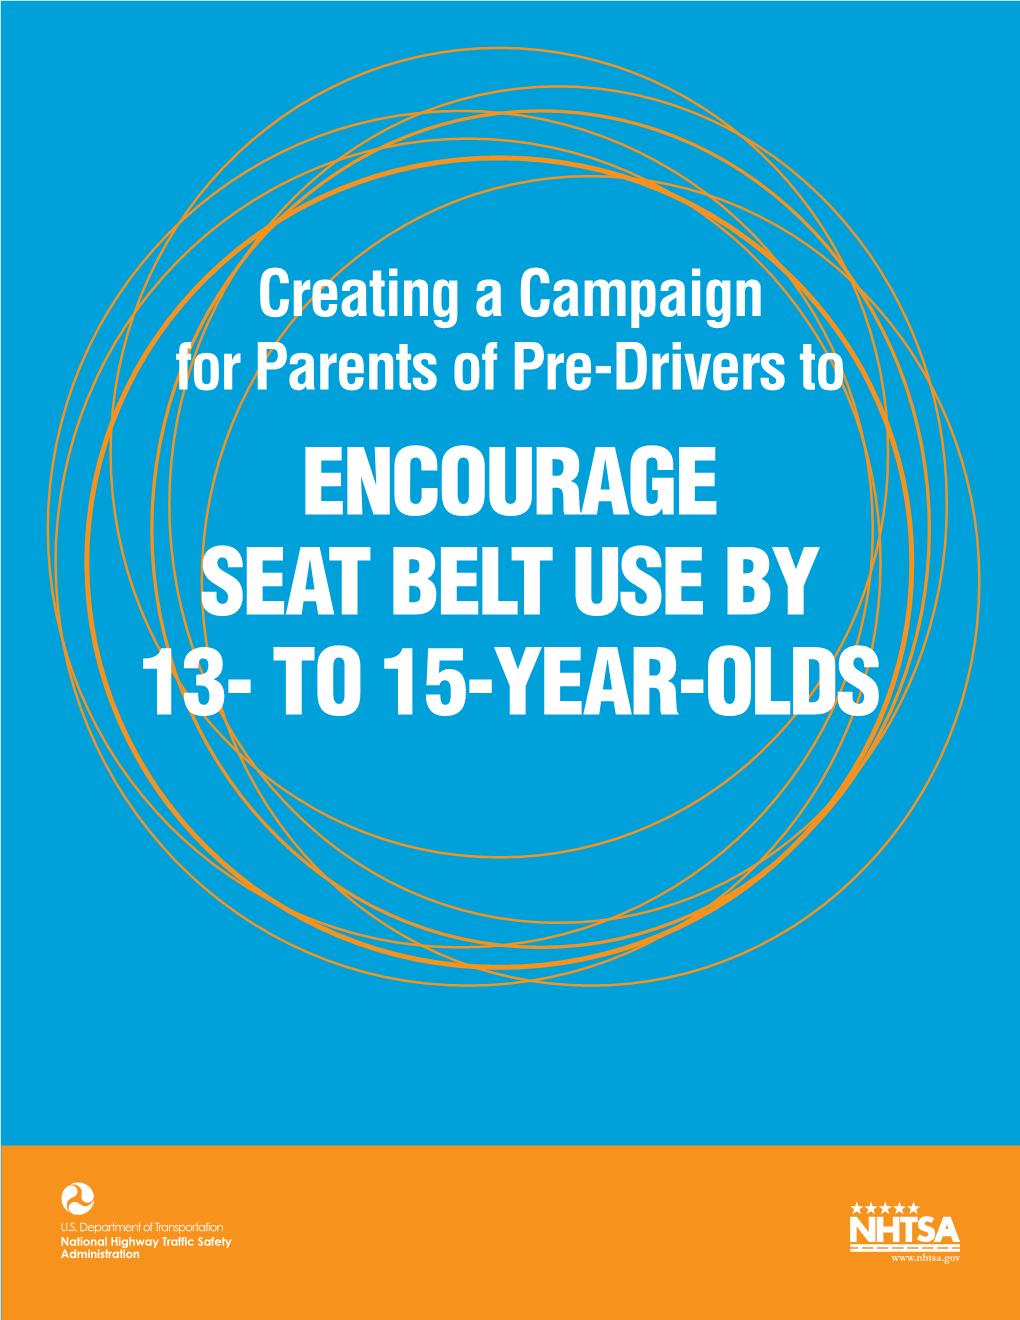 Encourage Seat Belt Use by 13- to 15-Year-Olds